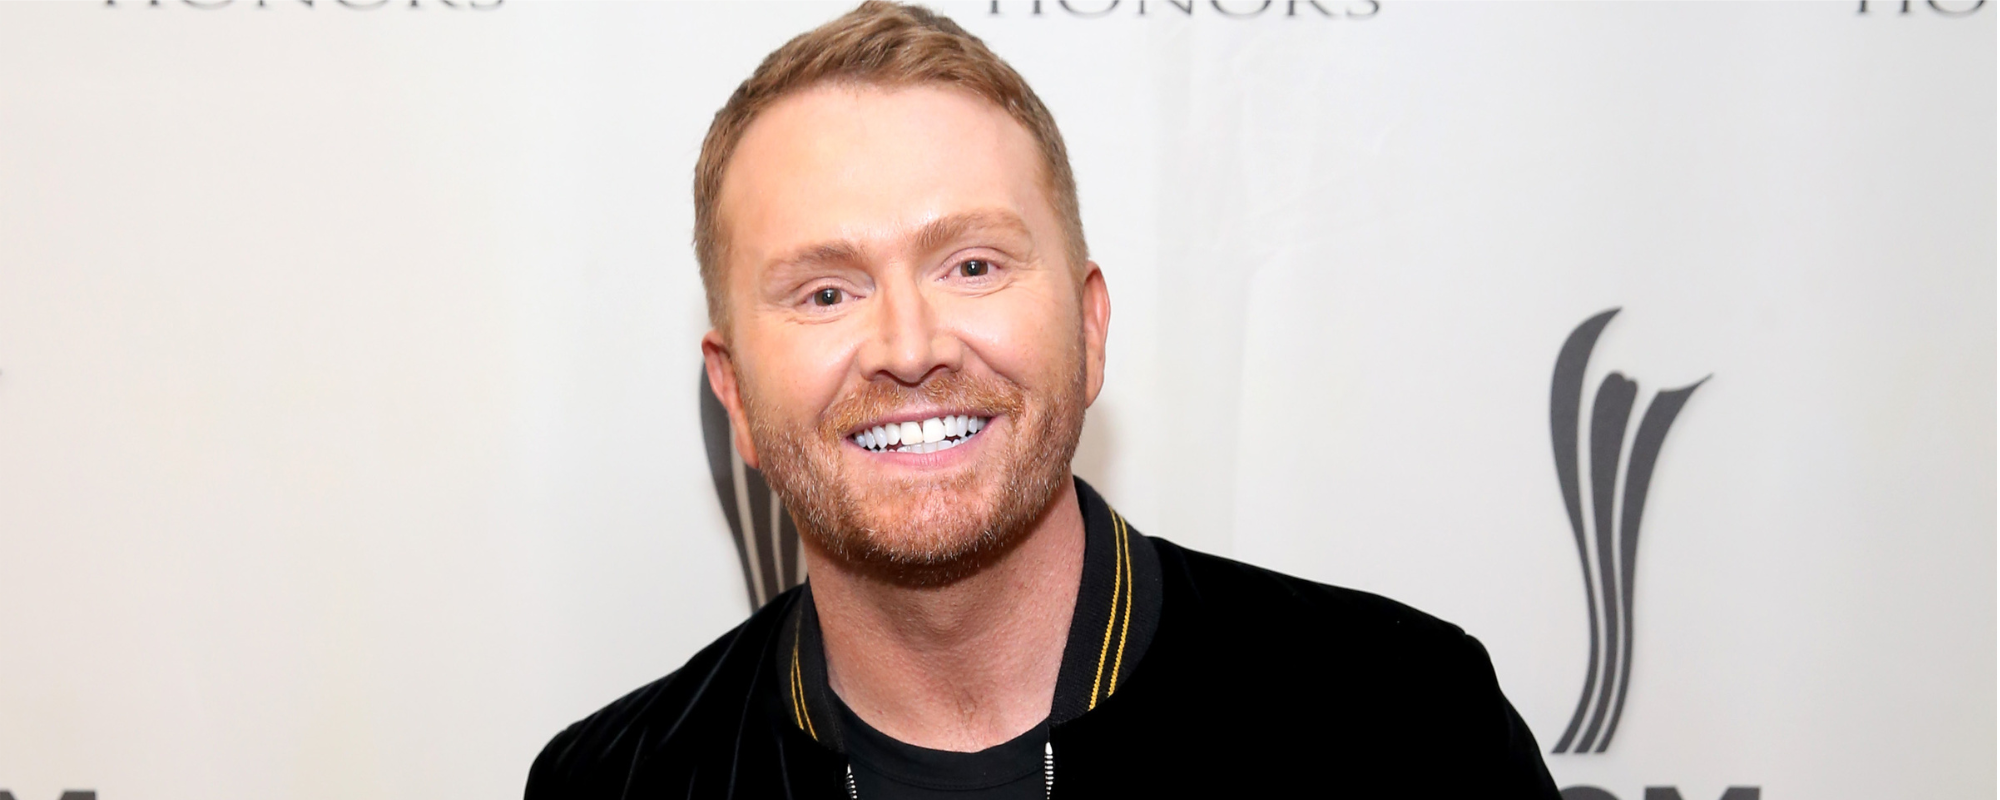 Shane McAnally Reveals His Favorite ‘Shucked’ Song